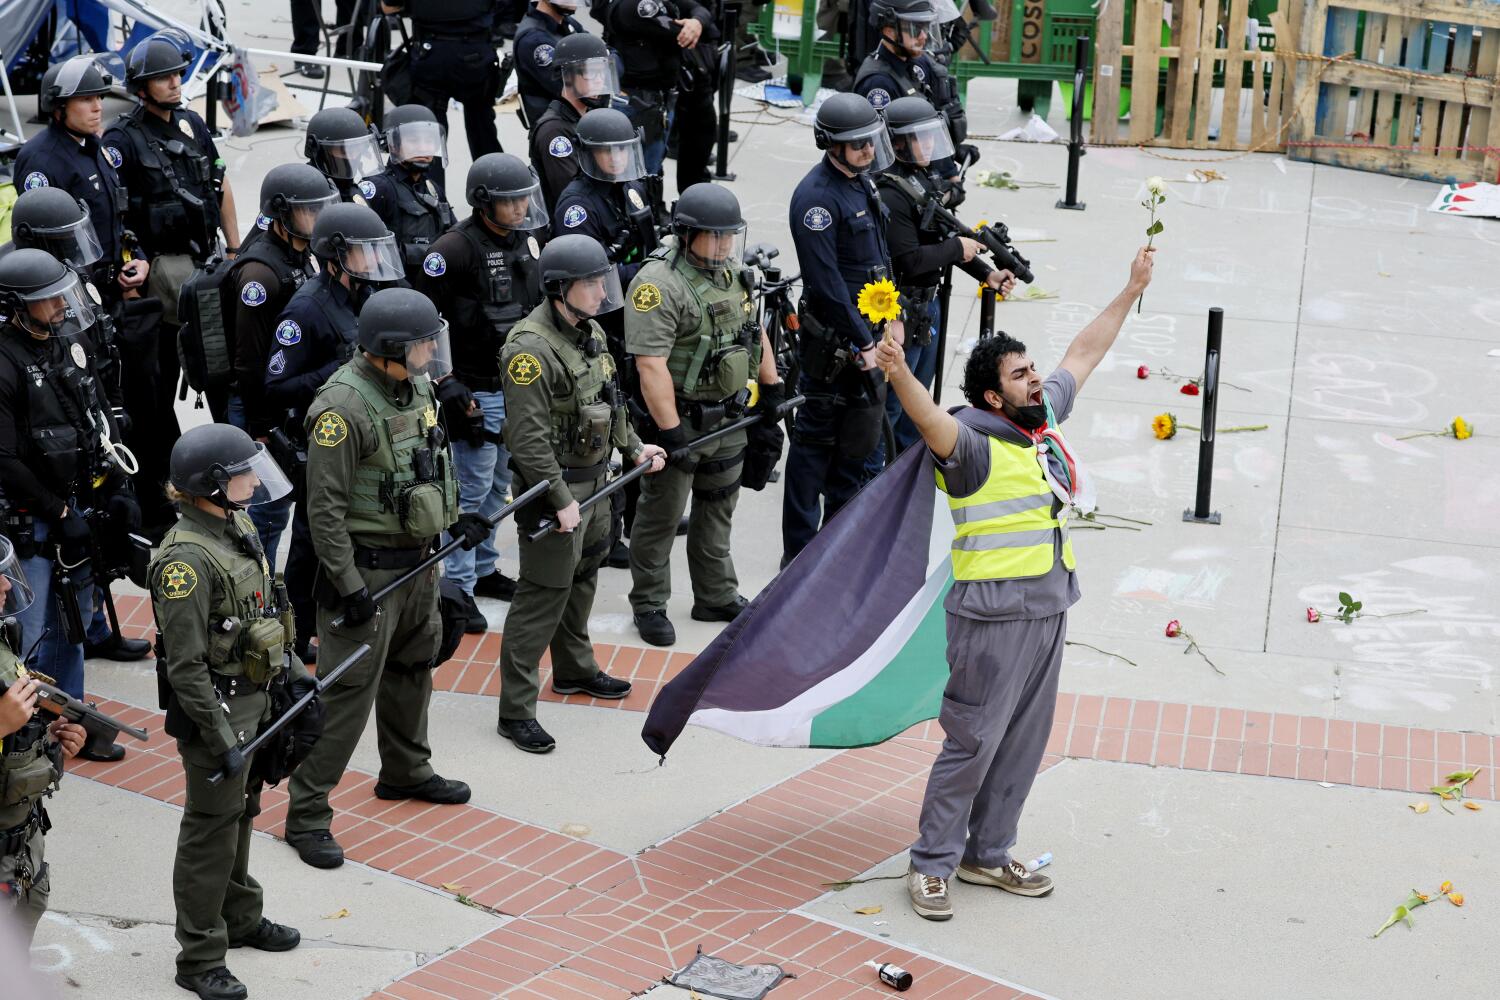 Image for display with article titled Photos: Authorities Move in to Clear Pro-Palestinian Protesters From UC Irvine